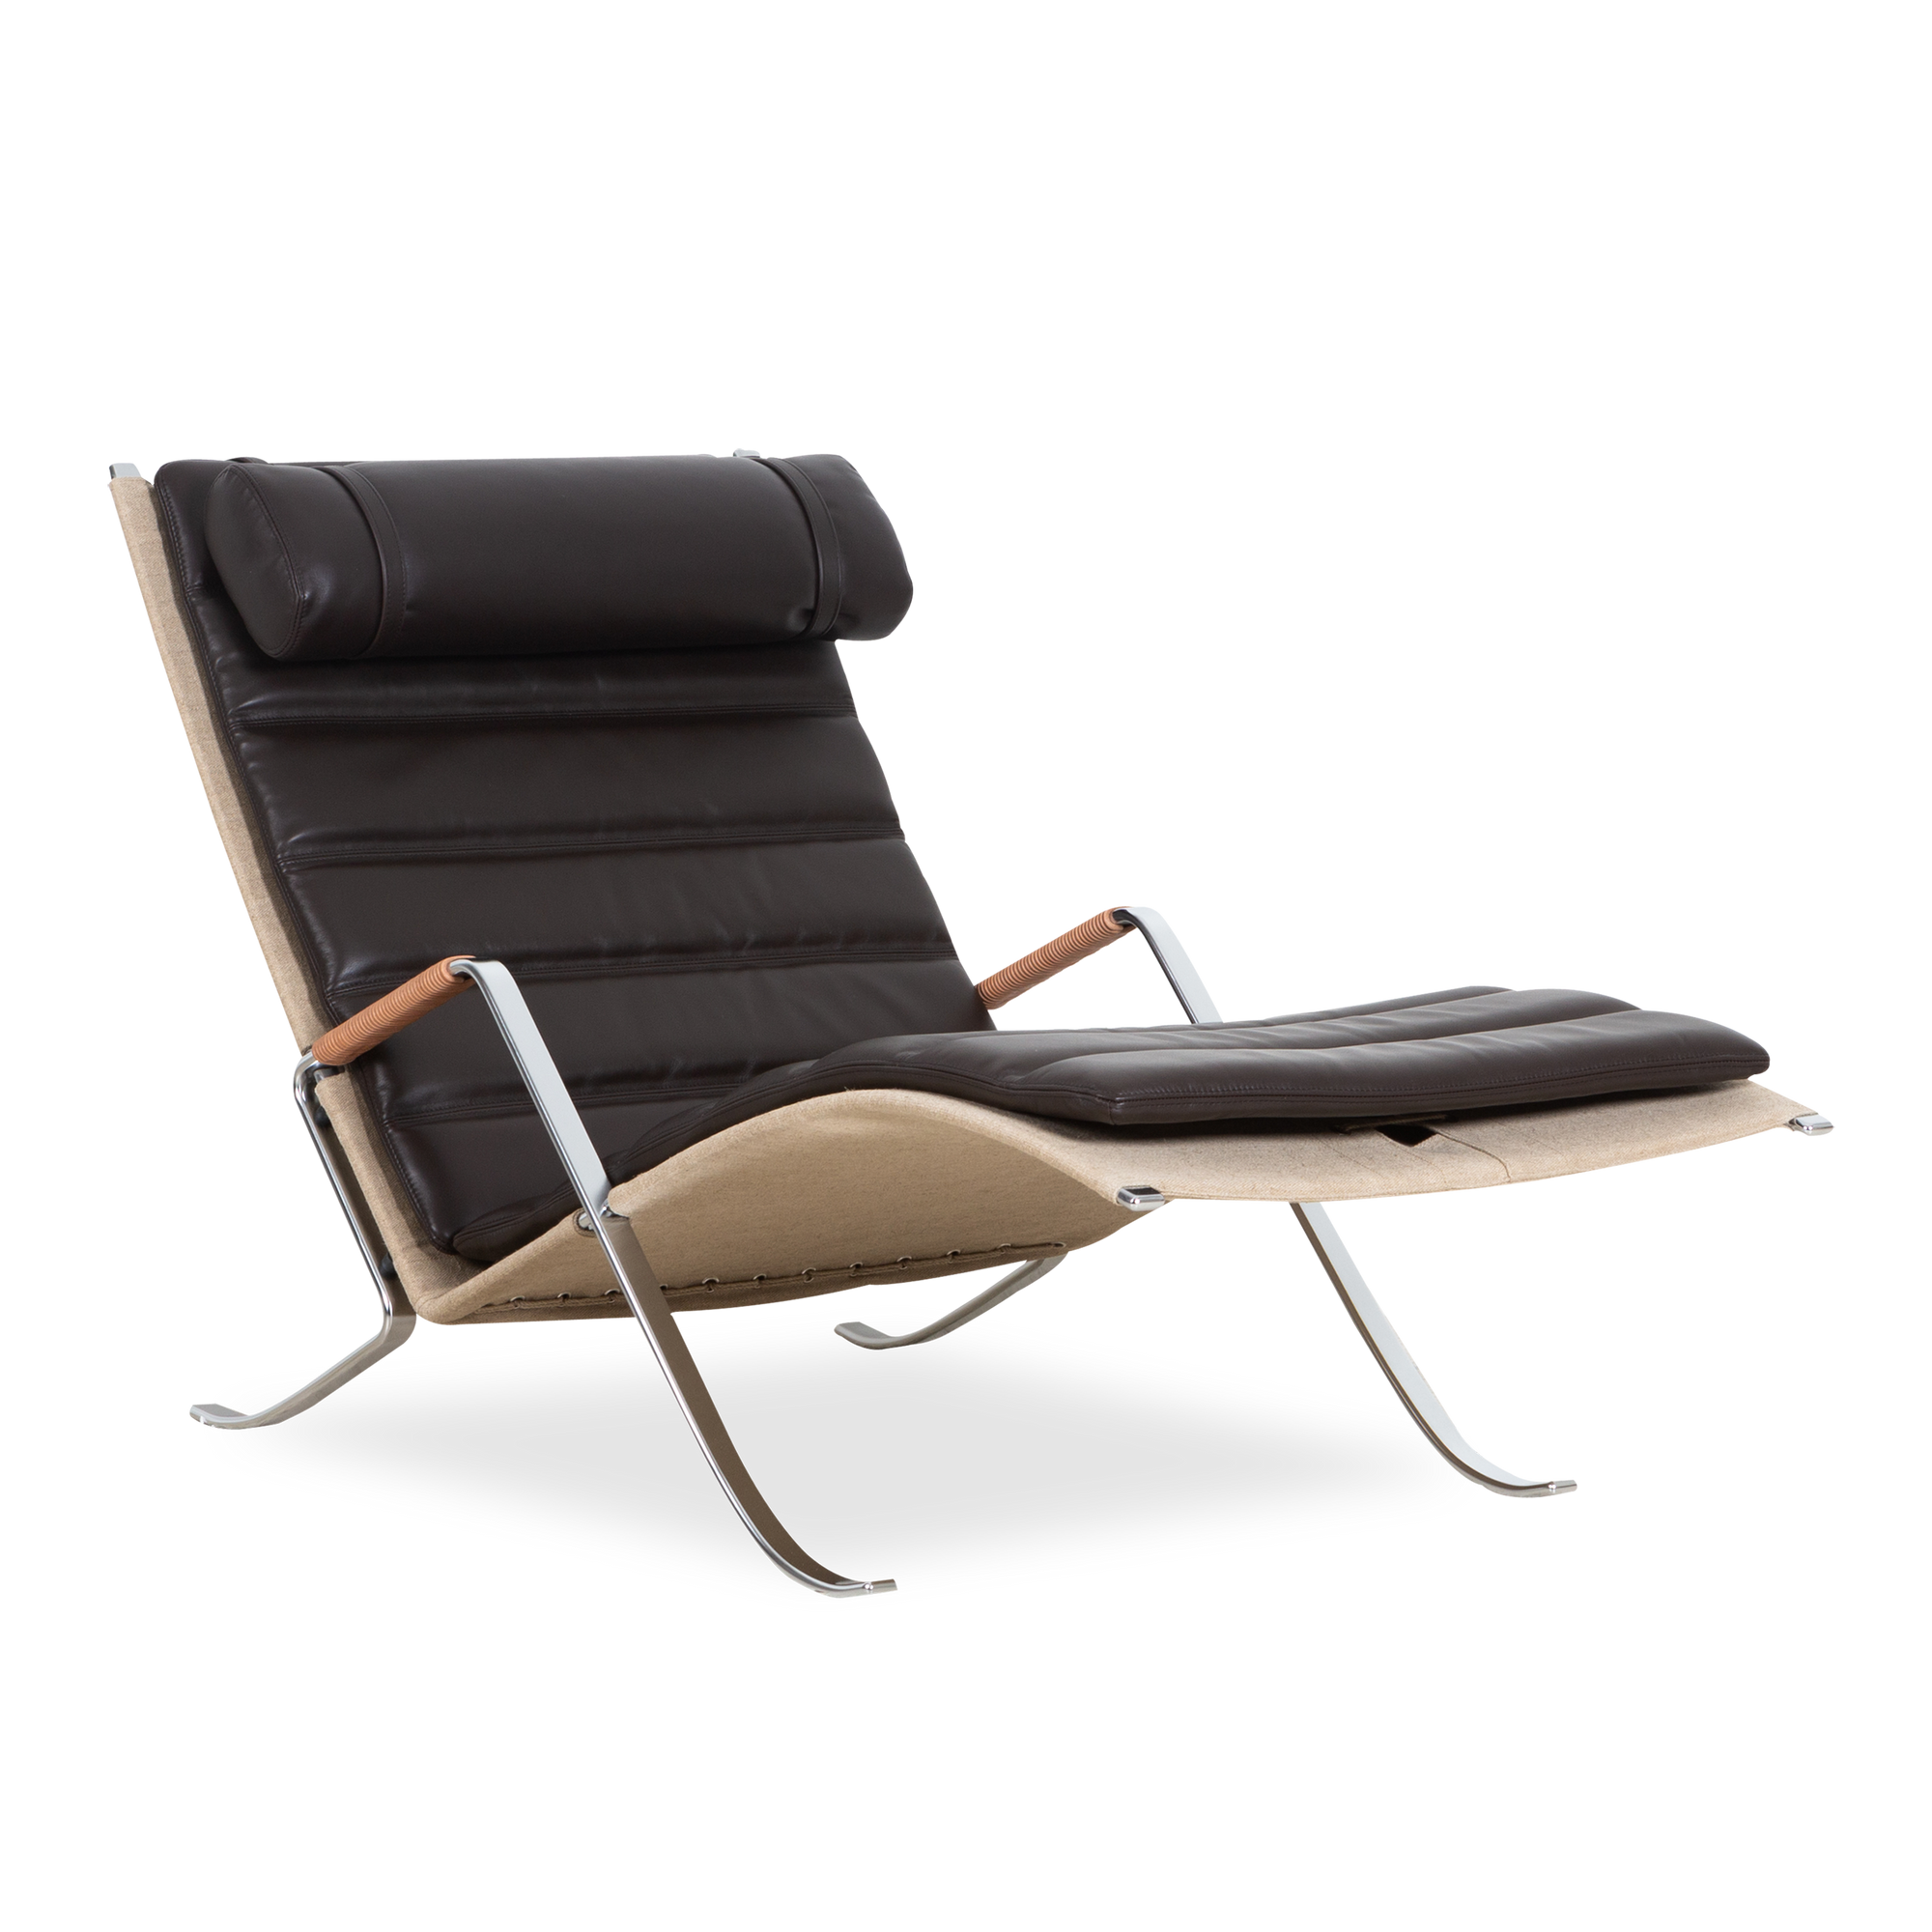 Designed in 1965, the FK 87 Grasshopper Chair invites you to unwind in style.